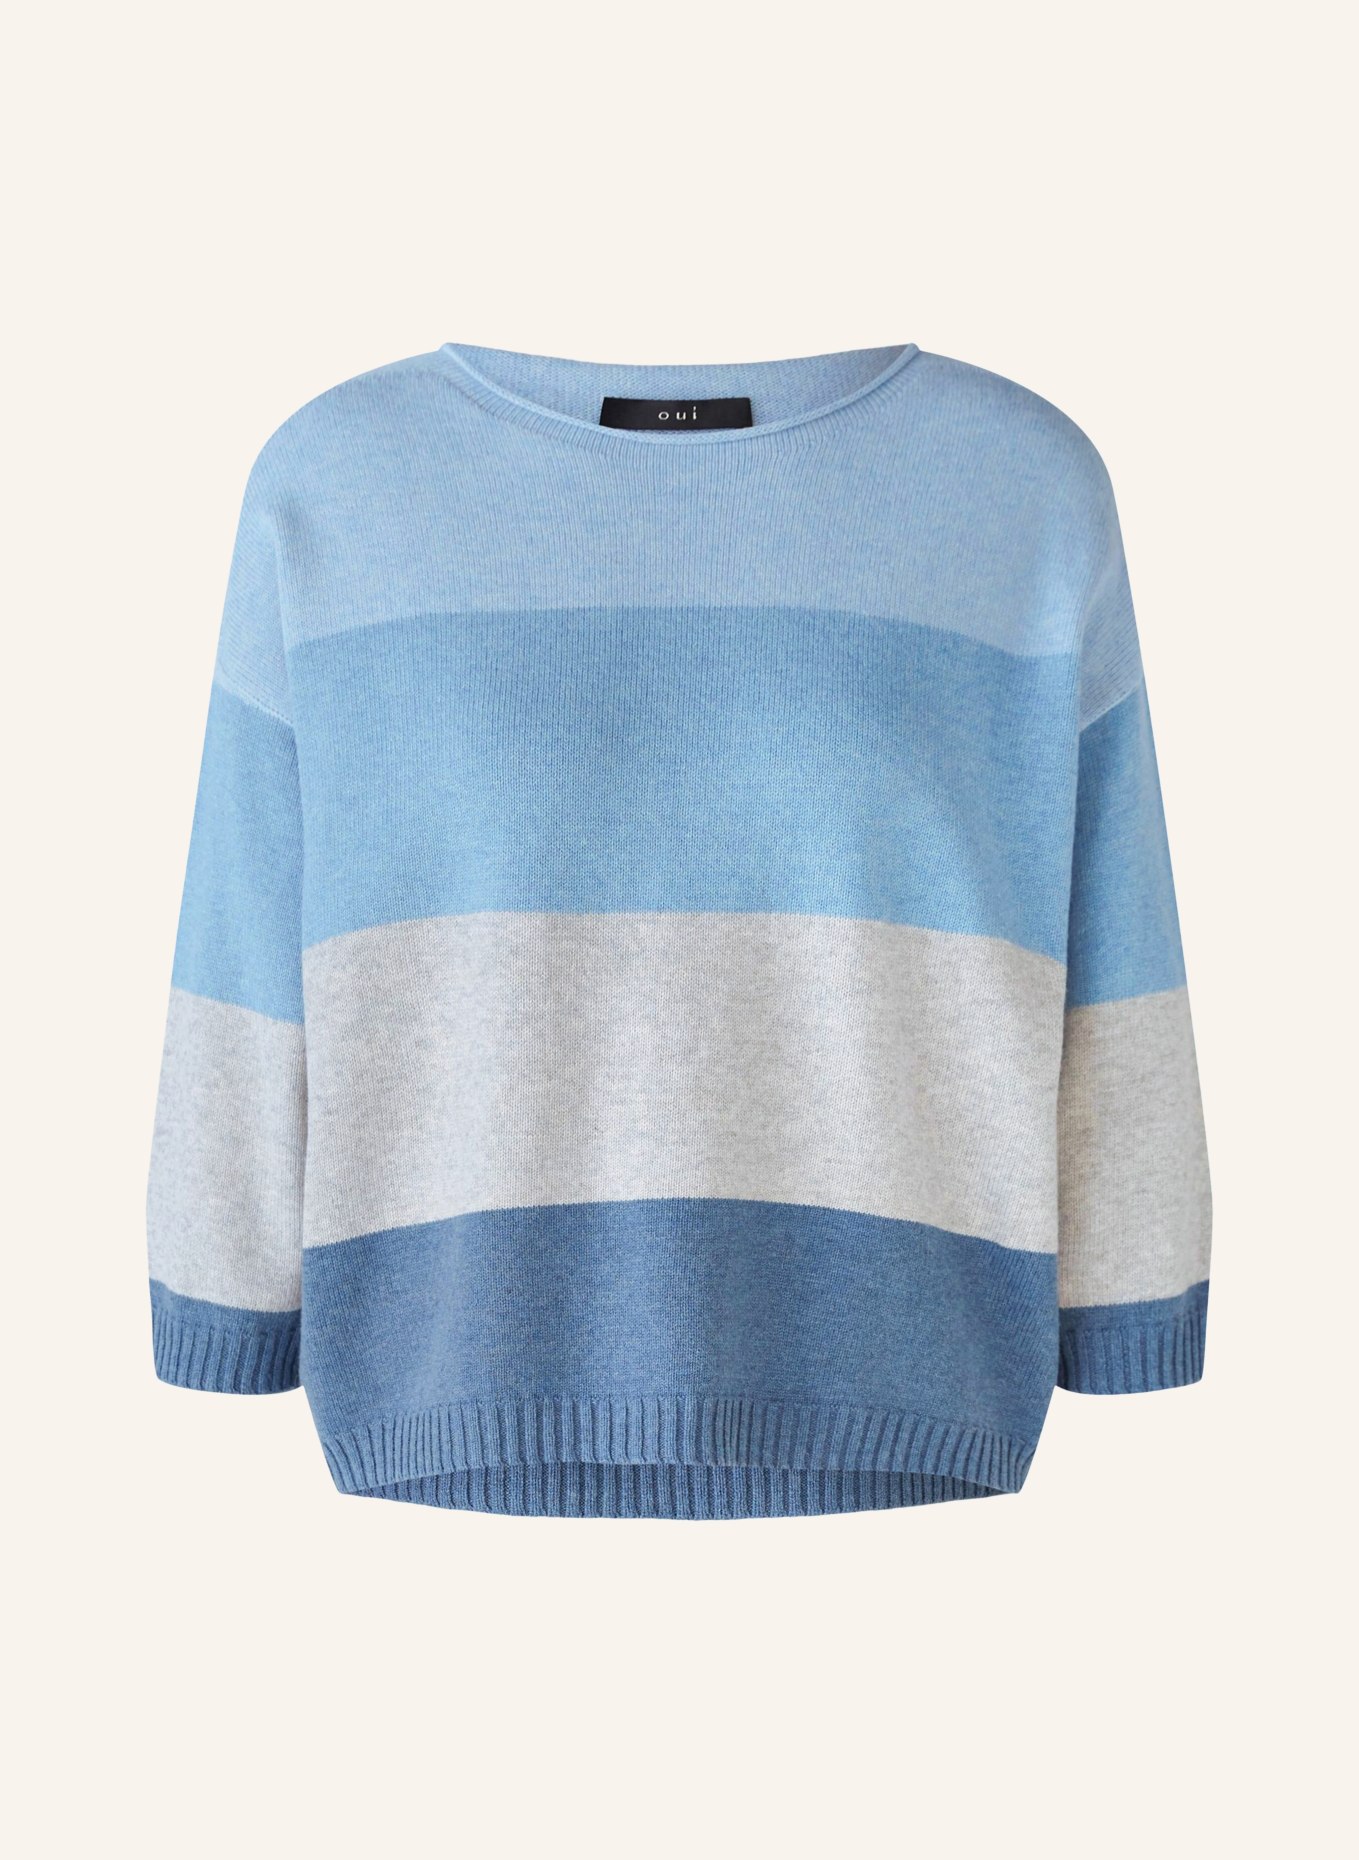 oui Sweater with 3/4 sleeves, Color: LIGHT BLUE/ BLUE/ LIGHT GRAY (Image 1)